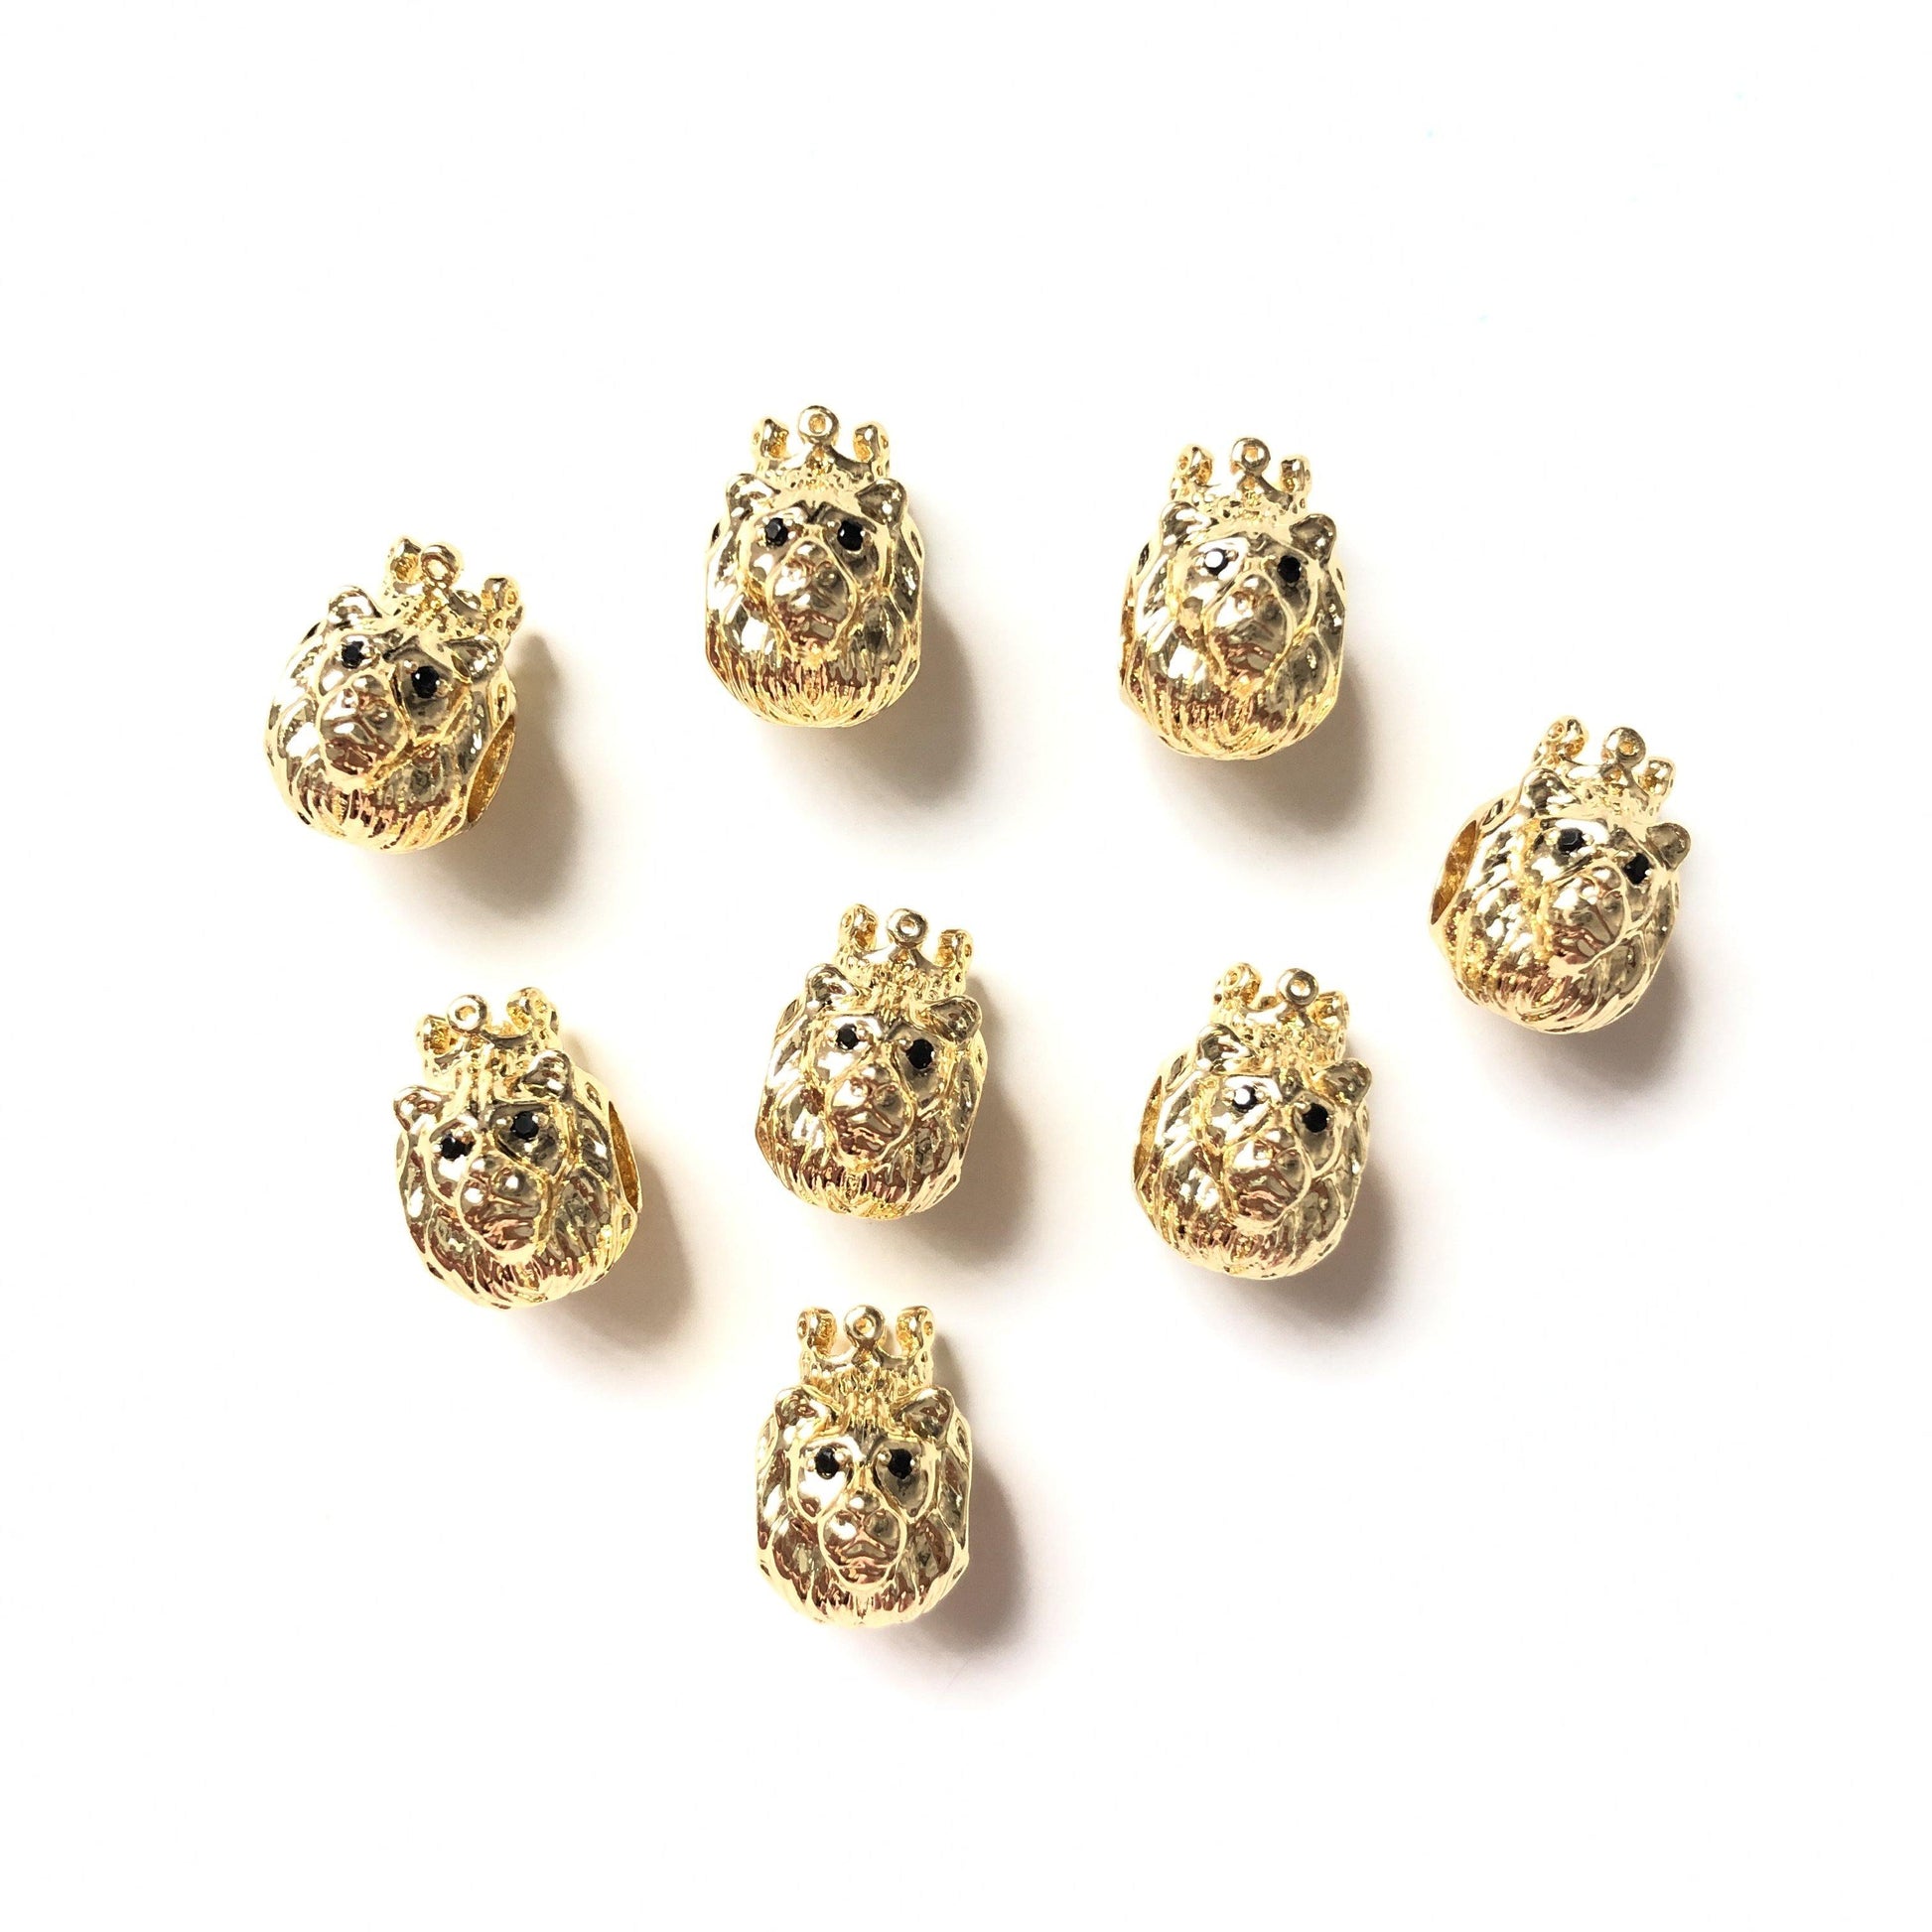 10-20pcs Gold Plated Copper Crown Lion King Spacers Gold CZ Paved Spacers Animal Spacers Charms Beads Beyond